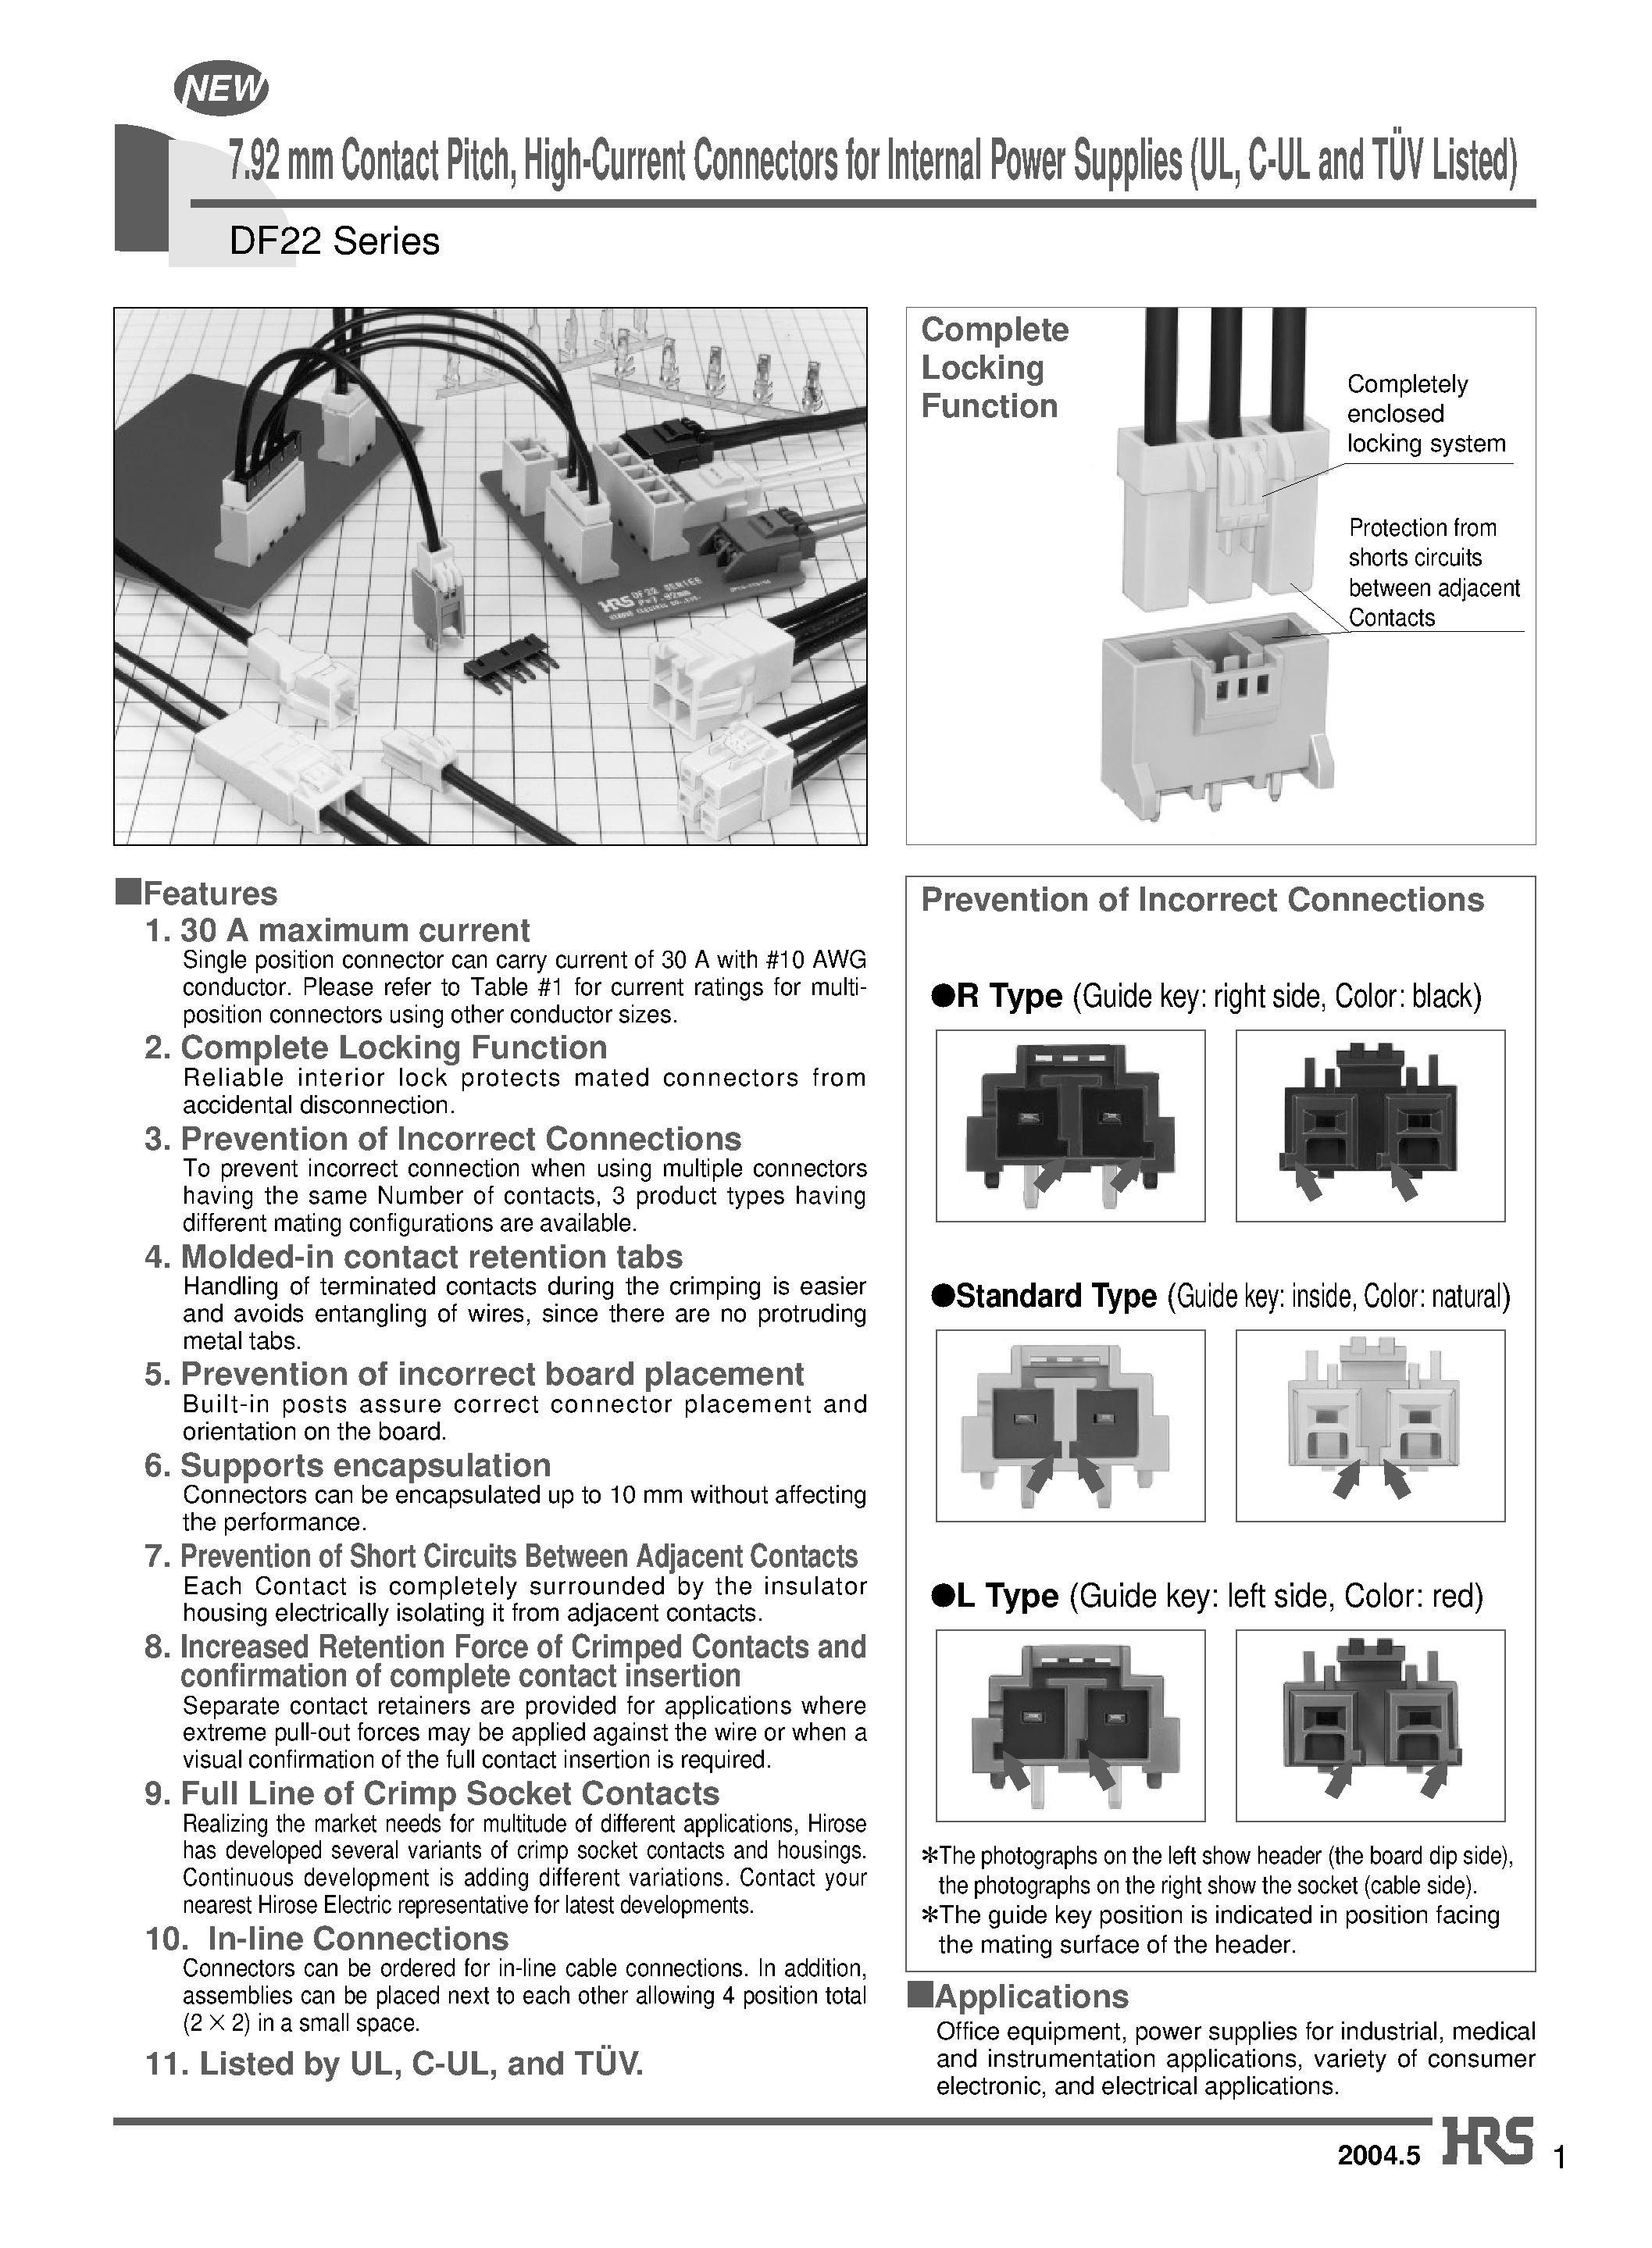 Datasheet DF22A-1DEP-7.92DS - 7.92 mm Contact Pitch/ High-Current Connectors for Internal Power Supplies (UL/ C-UL and TUV Listed) page 1